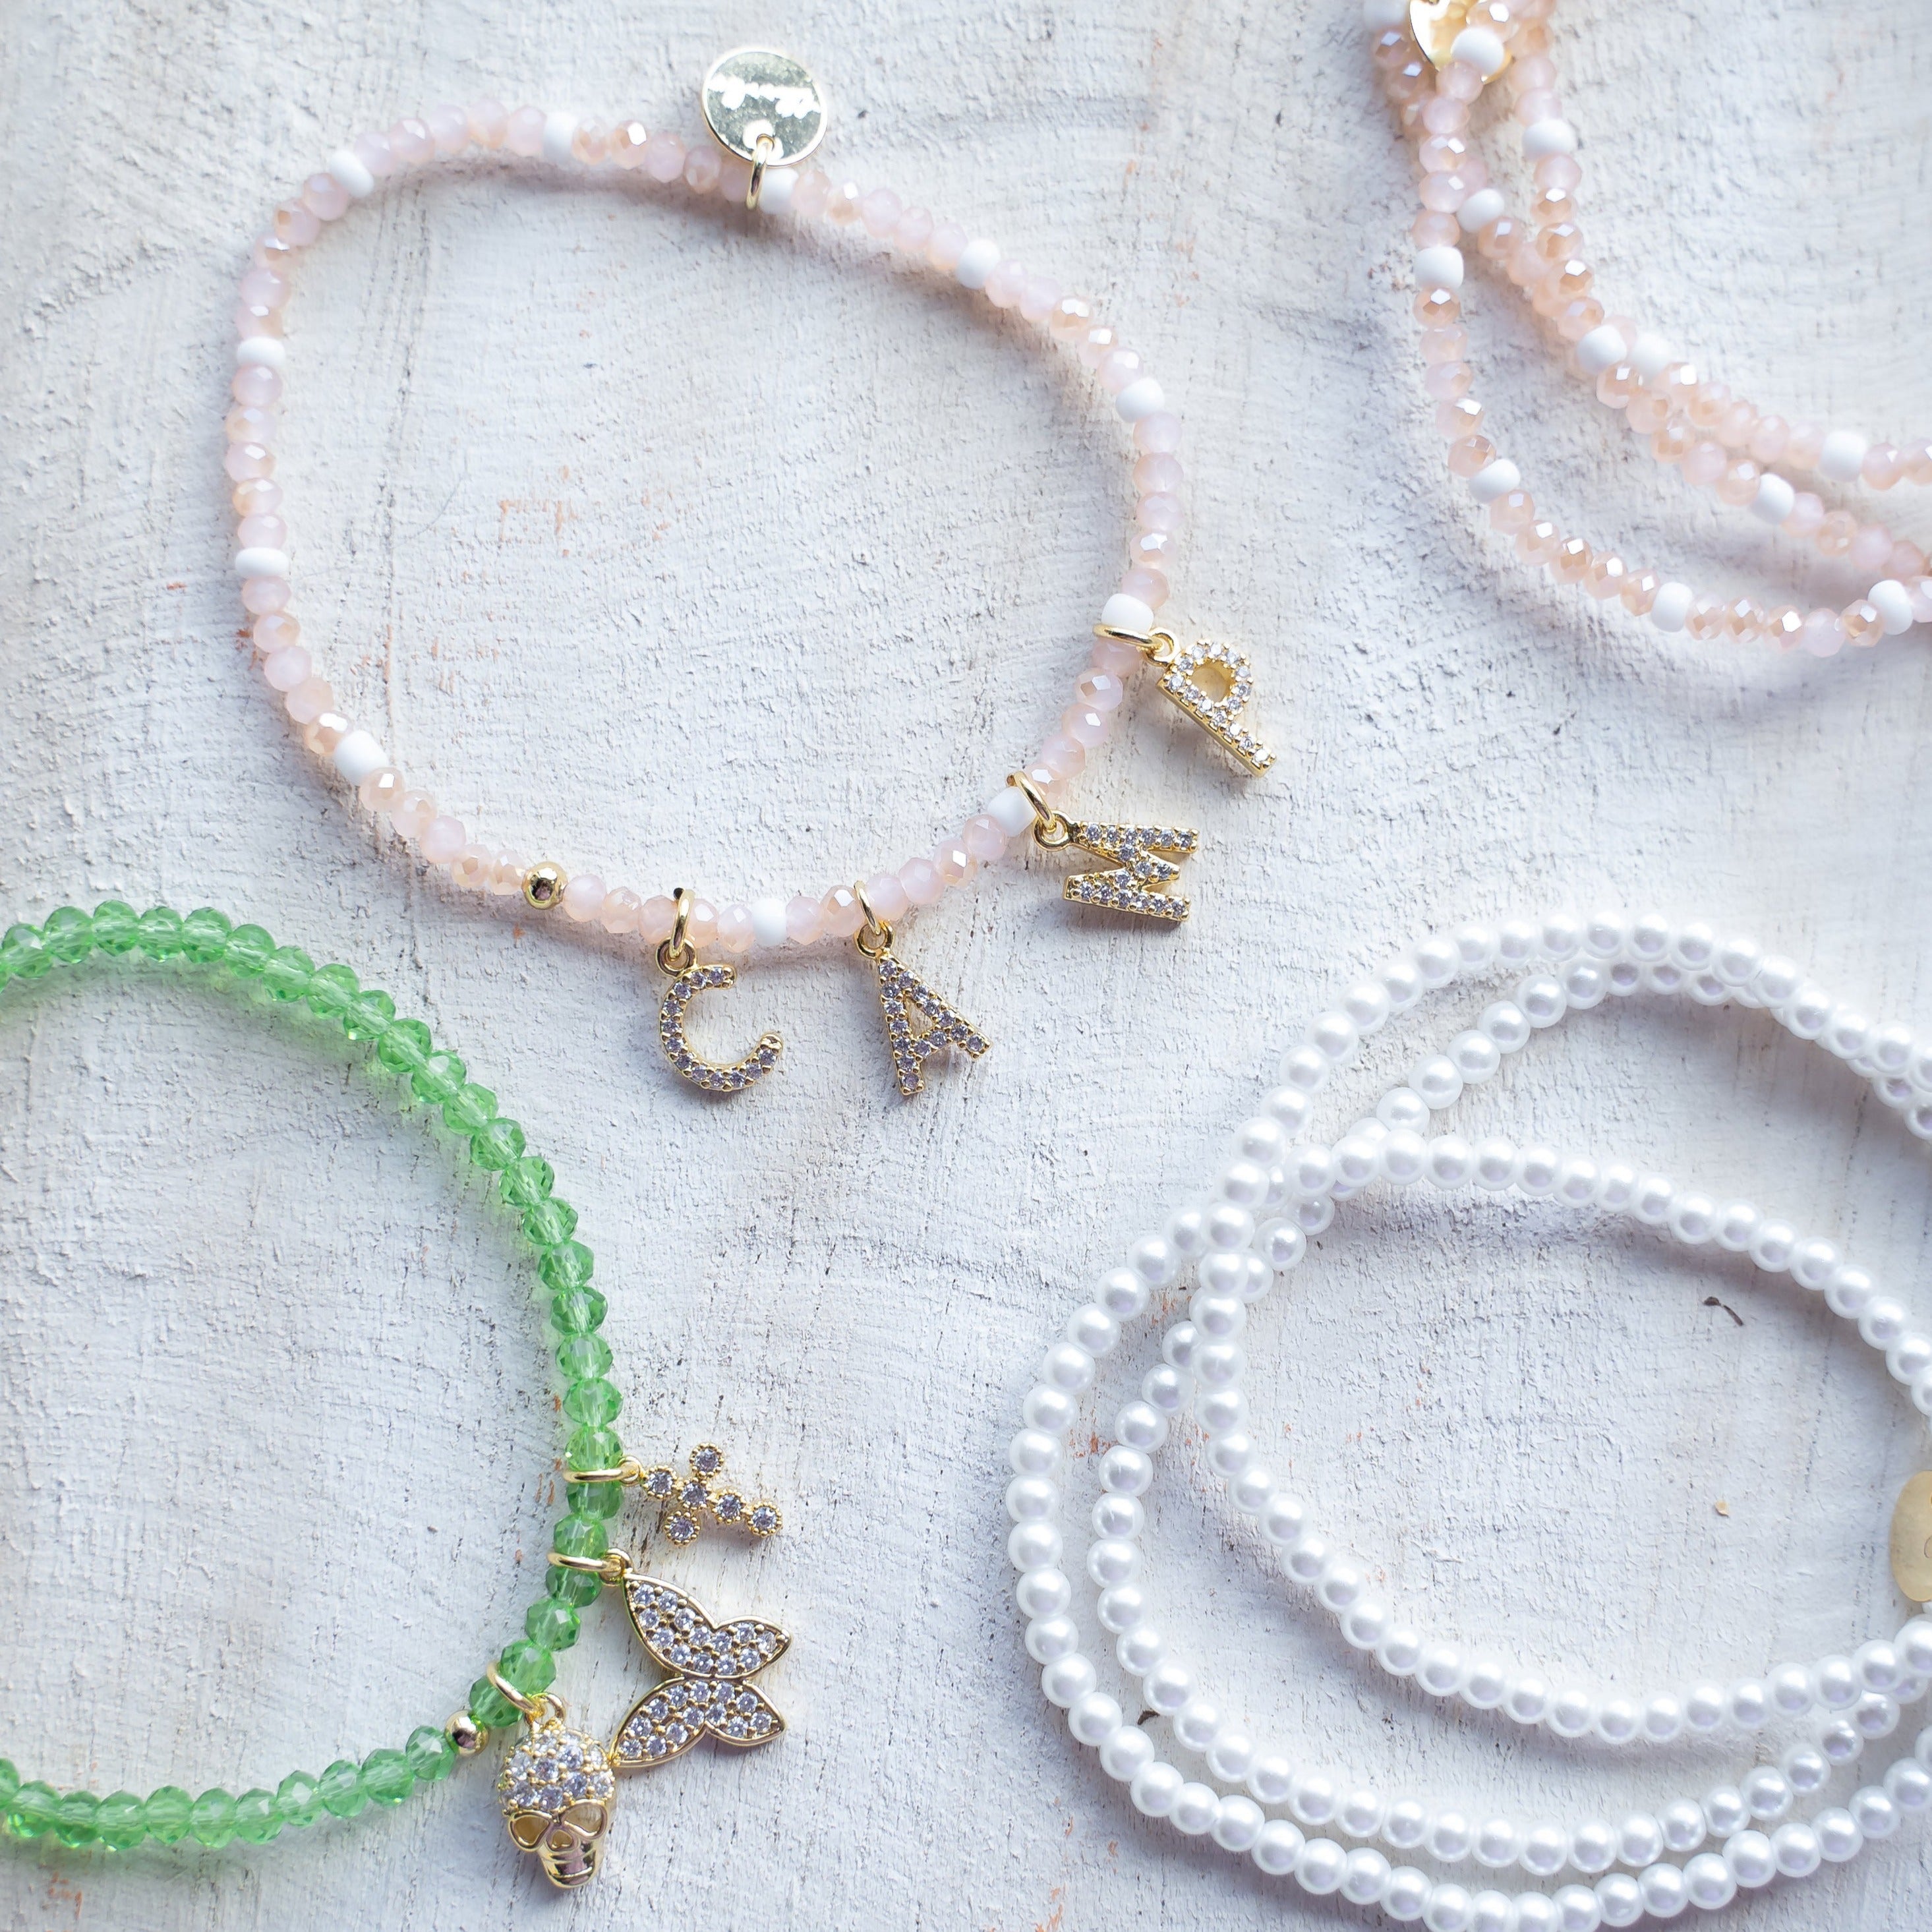 How to Create Your Own Custom Made Bracelet